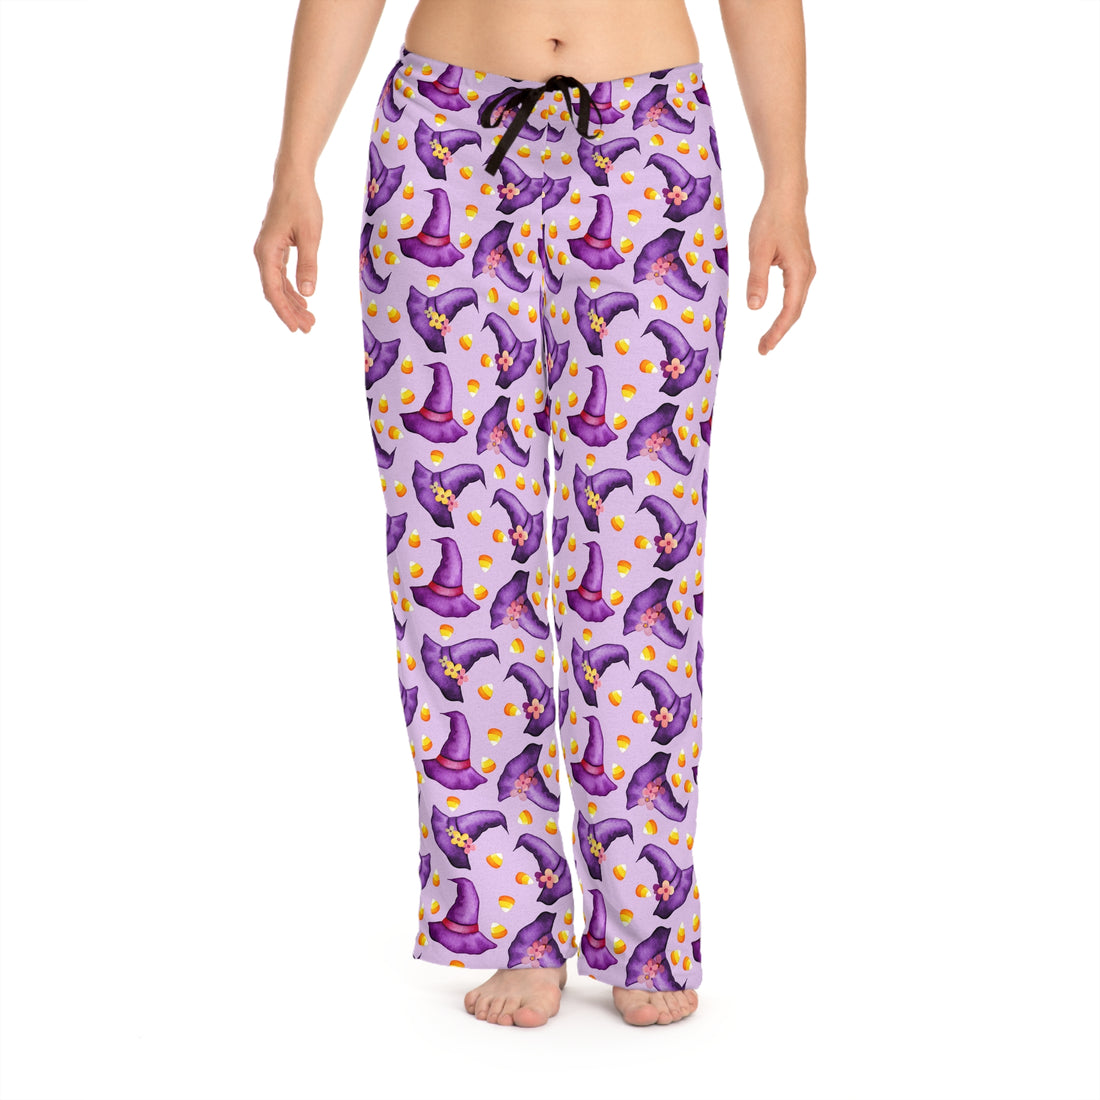 Witches Hat Women's Pajama Pants